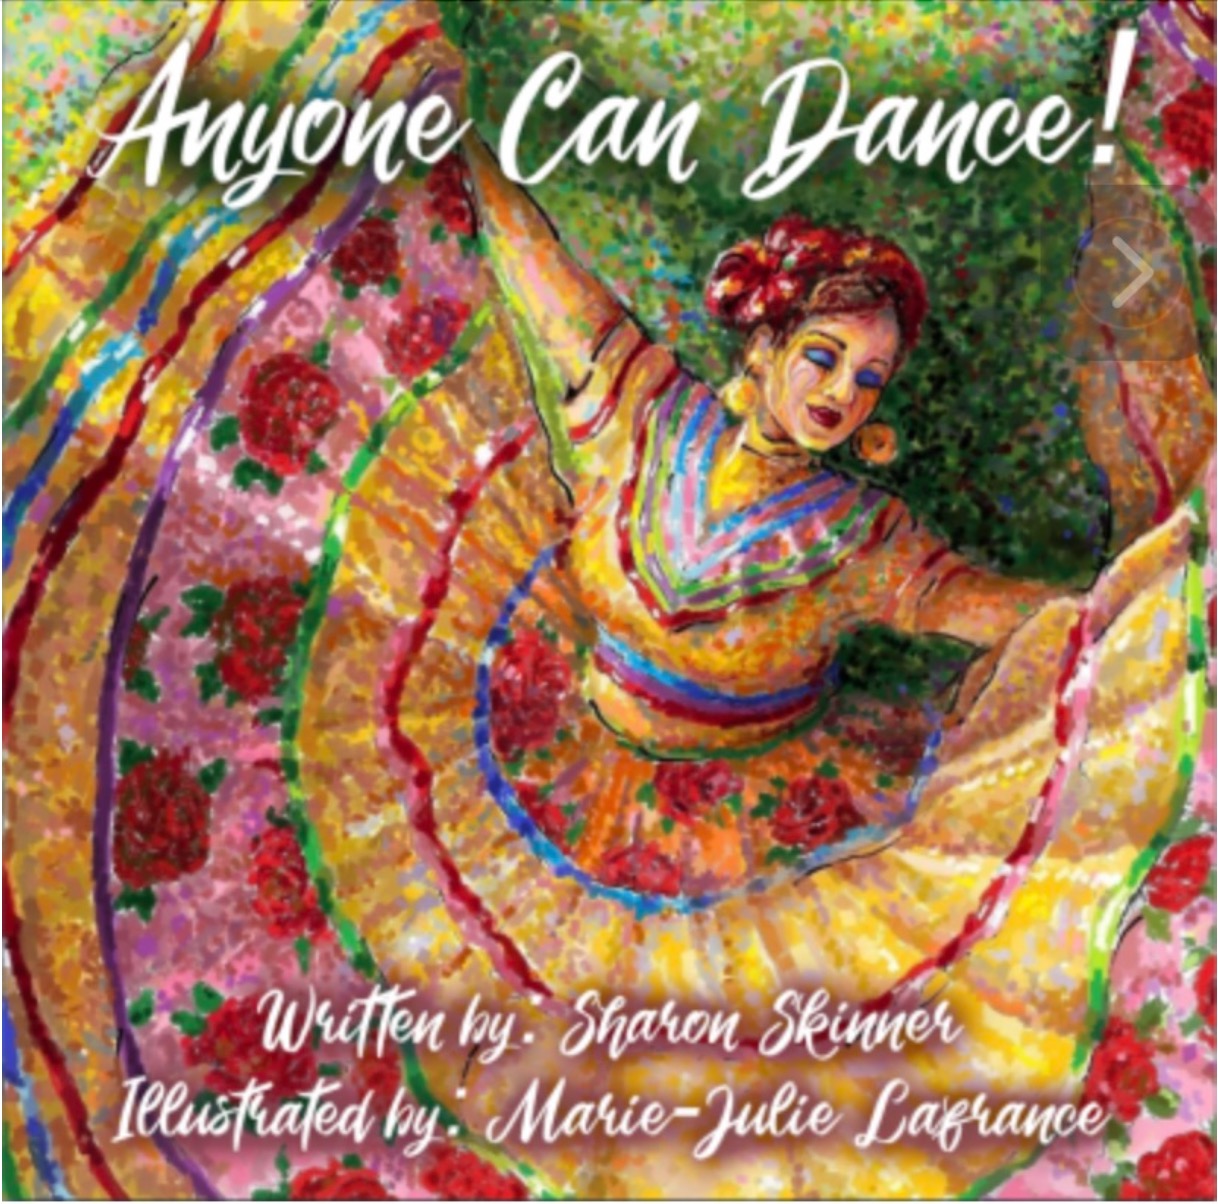 Image: Anyone can dance book cover